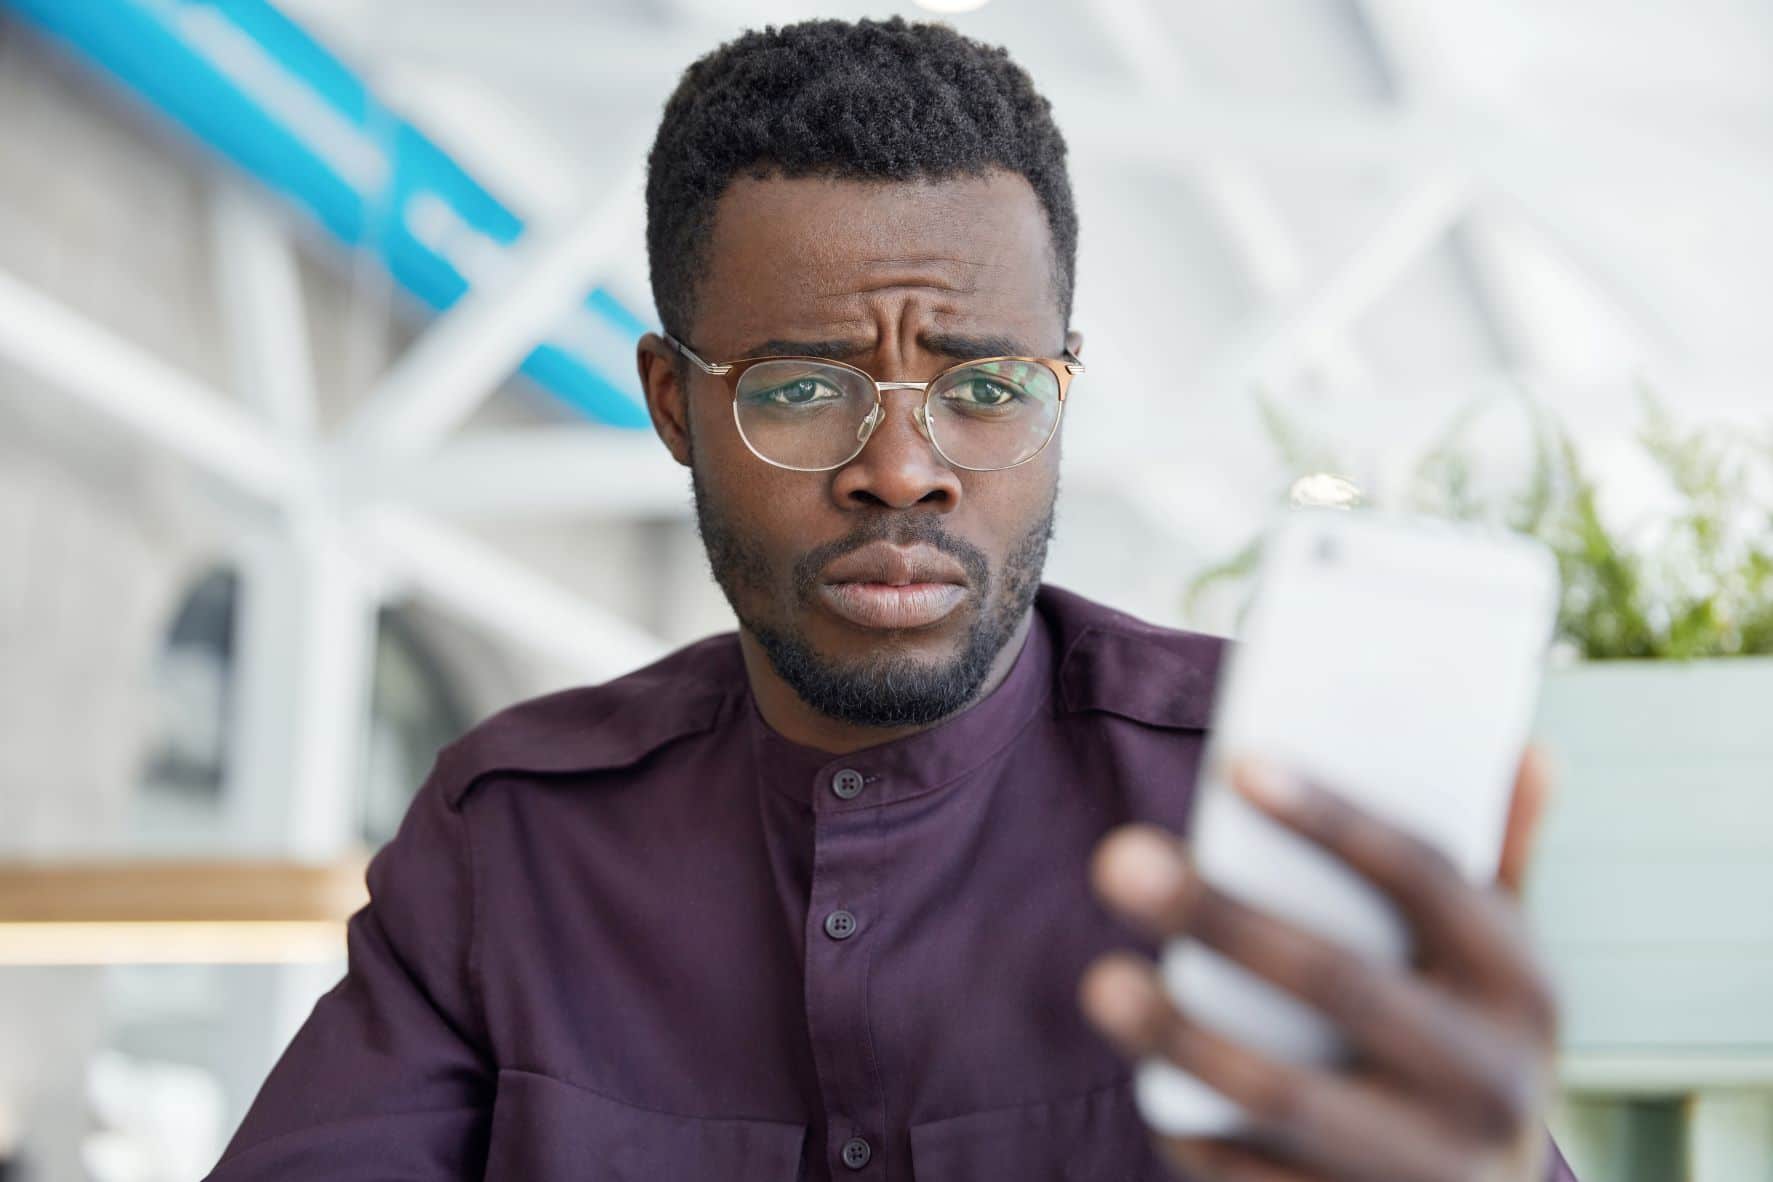 A black man looking worried at what he saw on his phone.